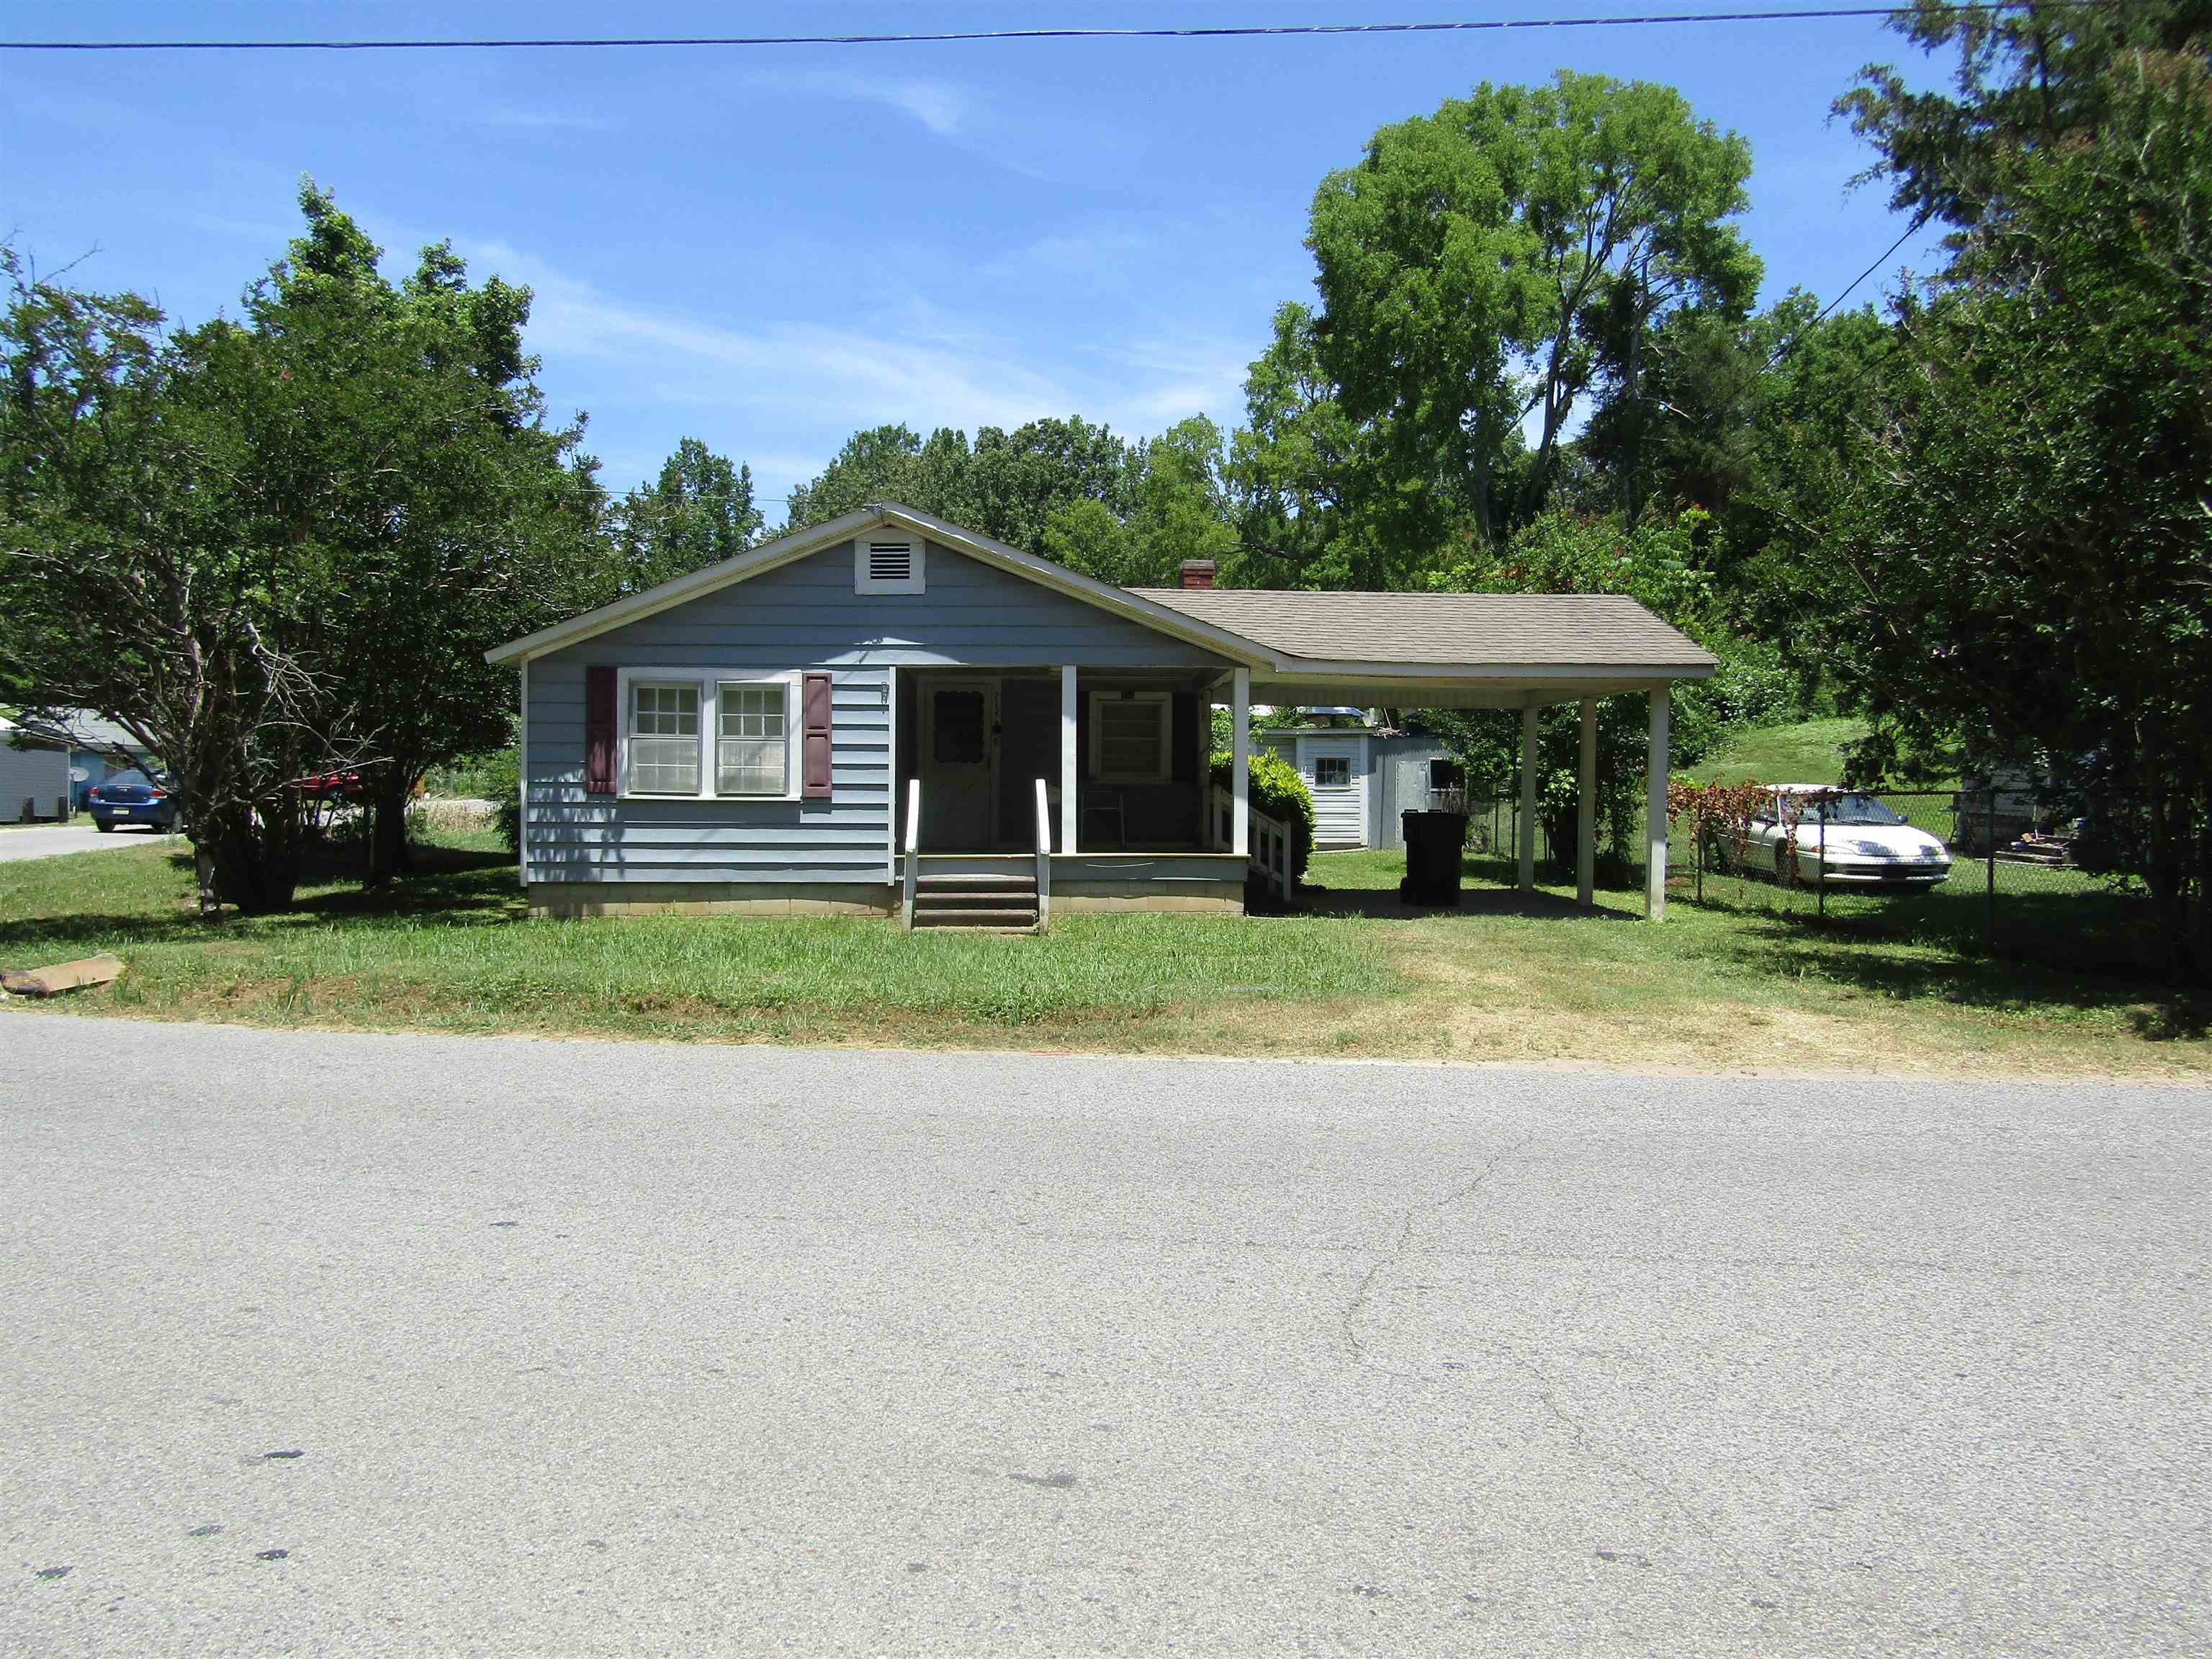 You'll love this fixer upper.  Priced right! Call today to make this your starter home or investment property.